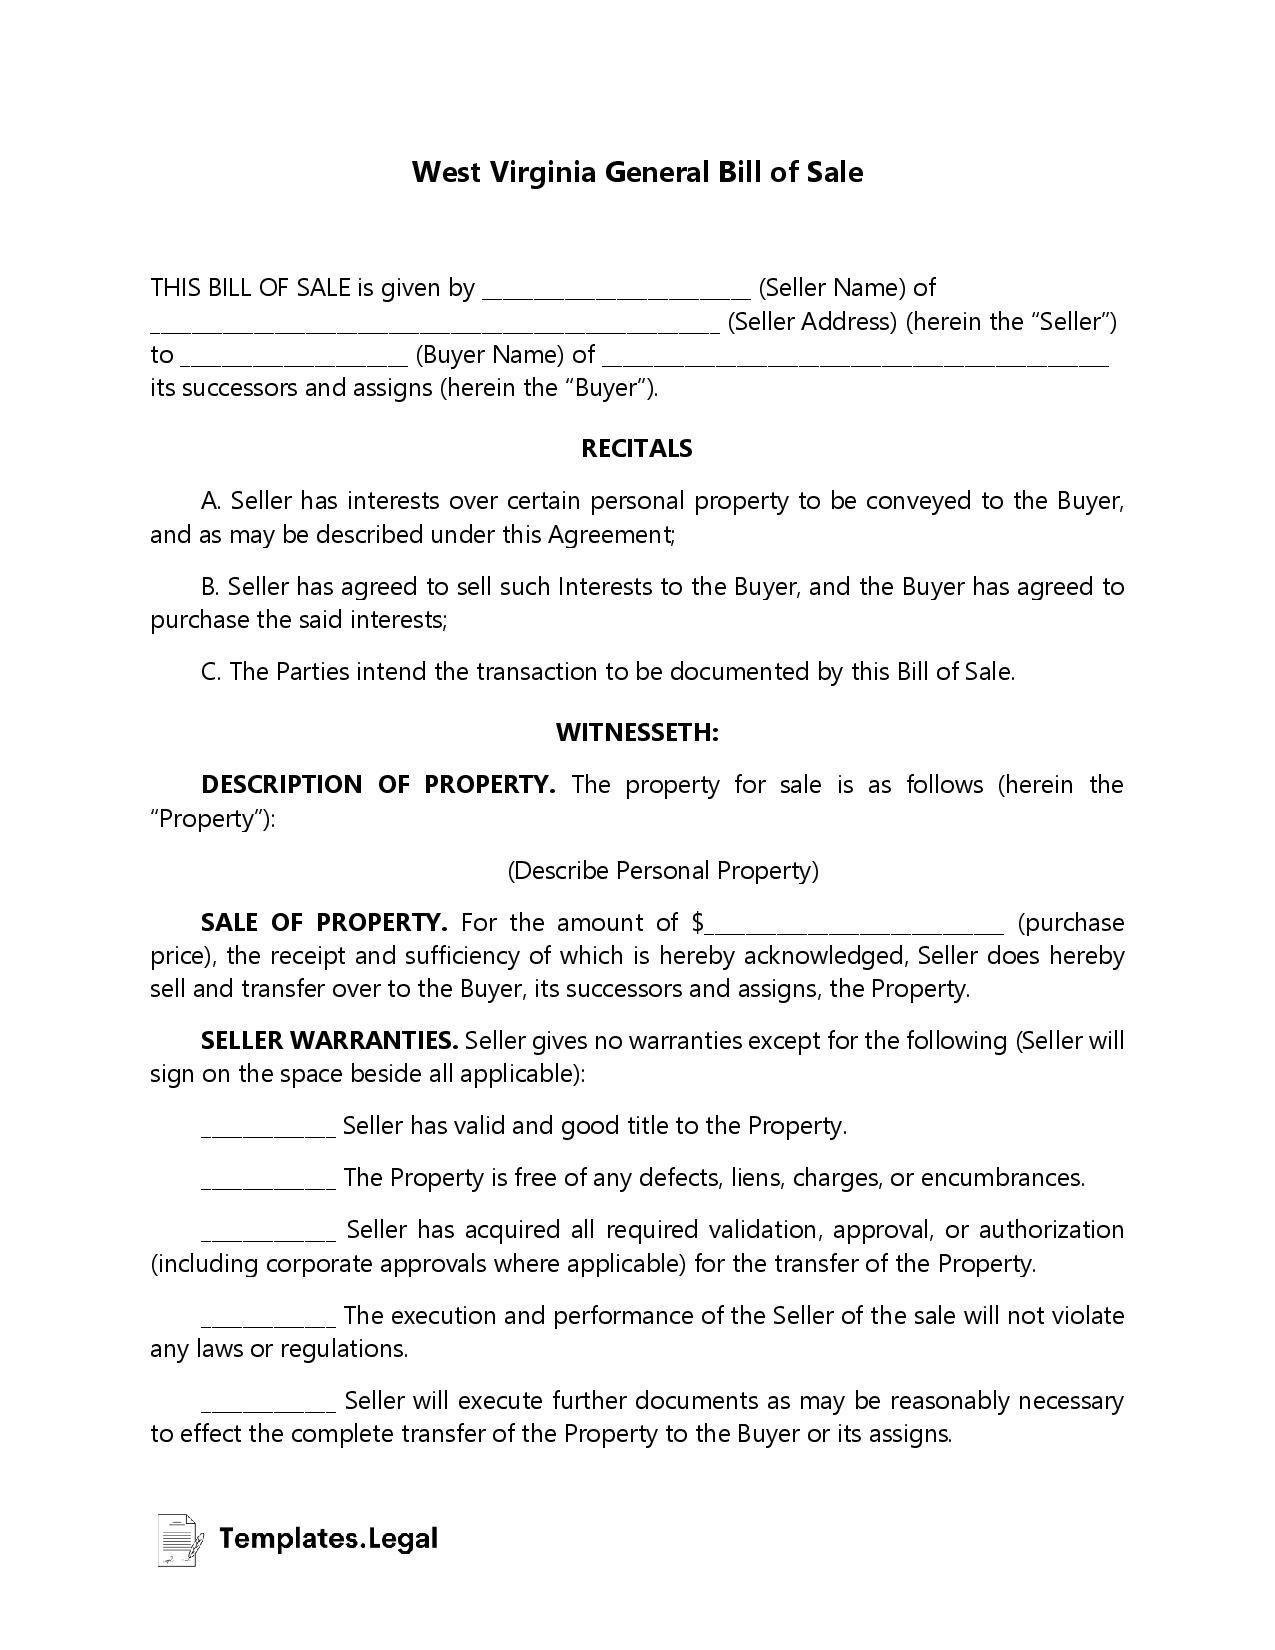 West Virginia General Bill of Sale - Templates.Legal